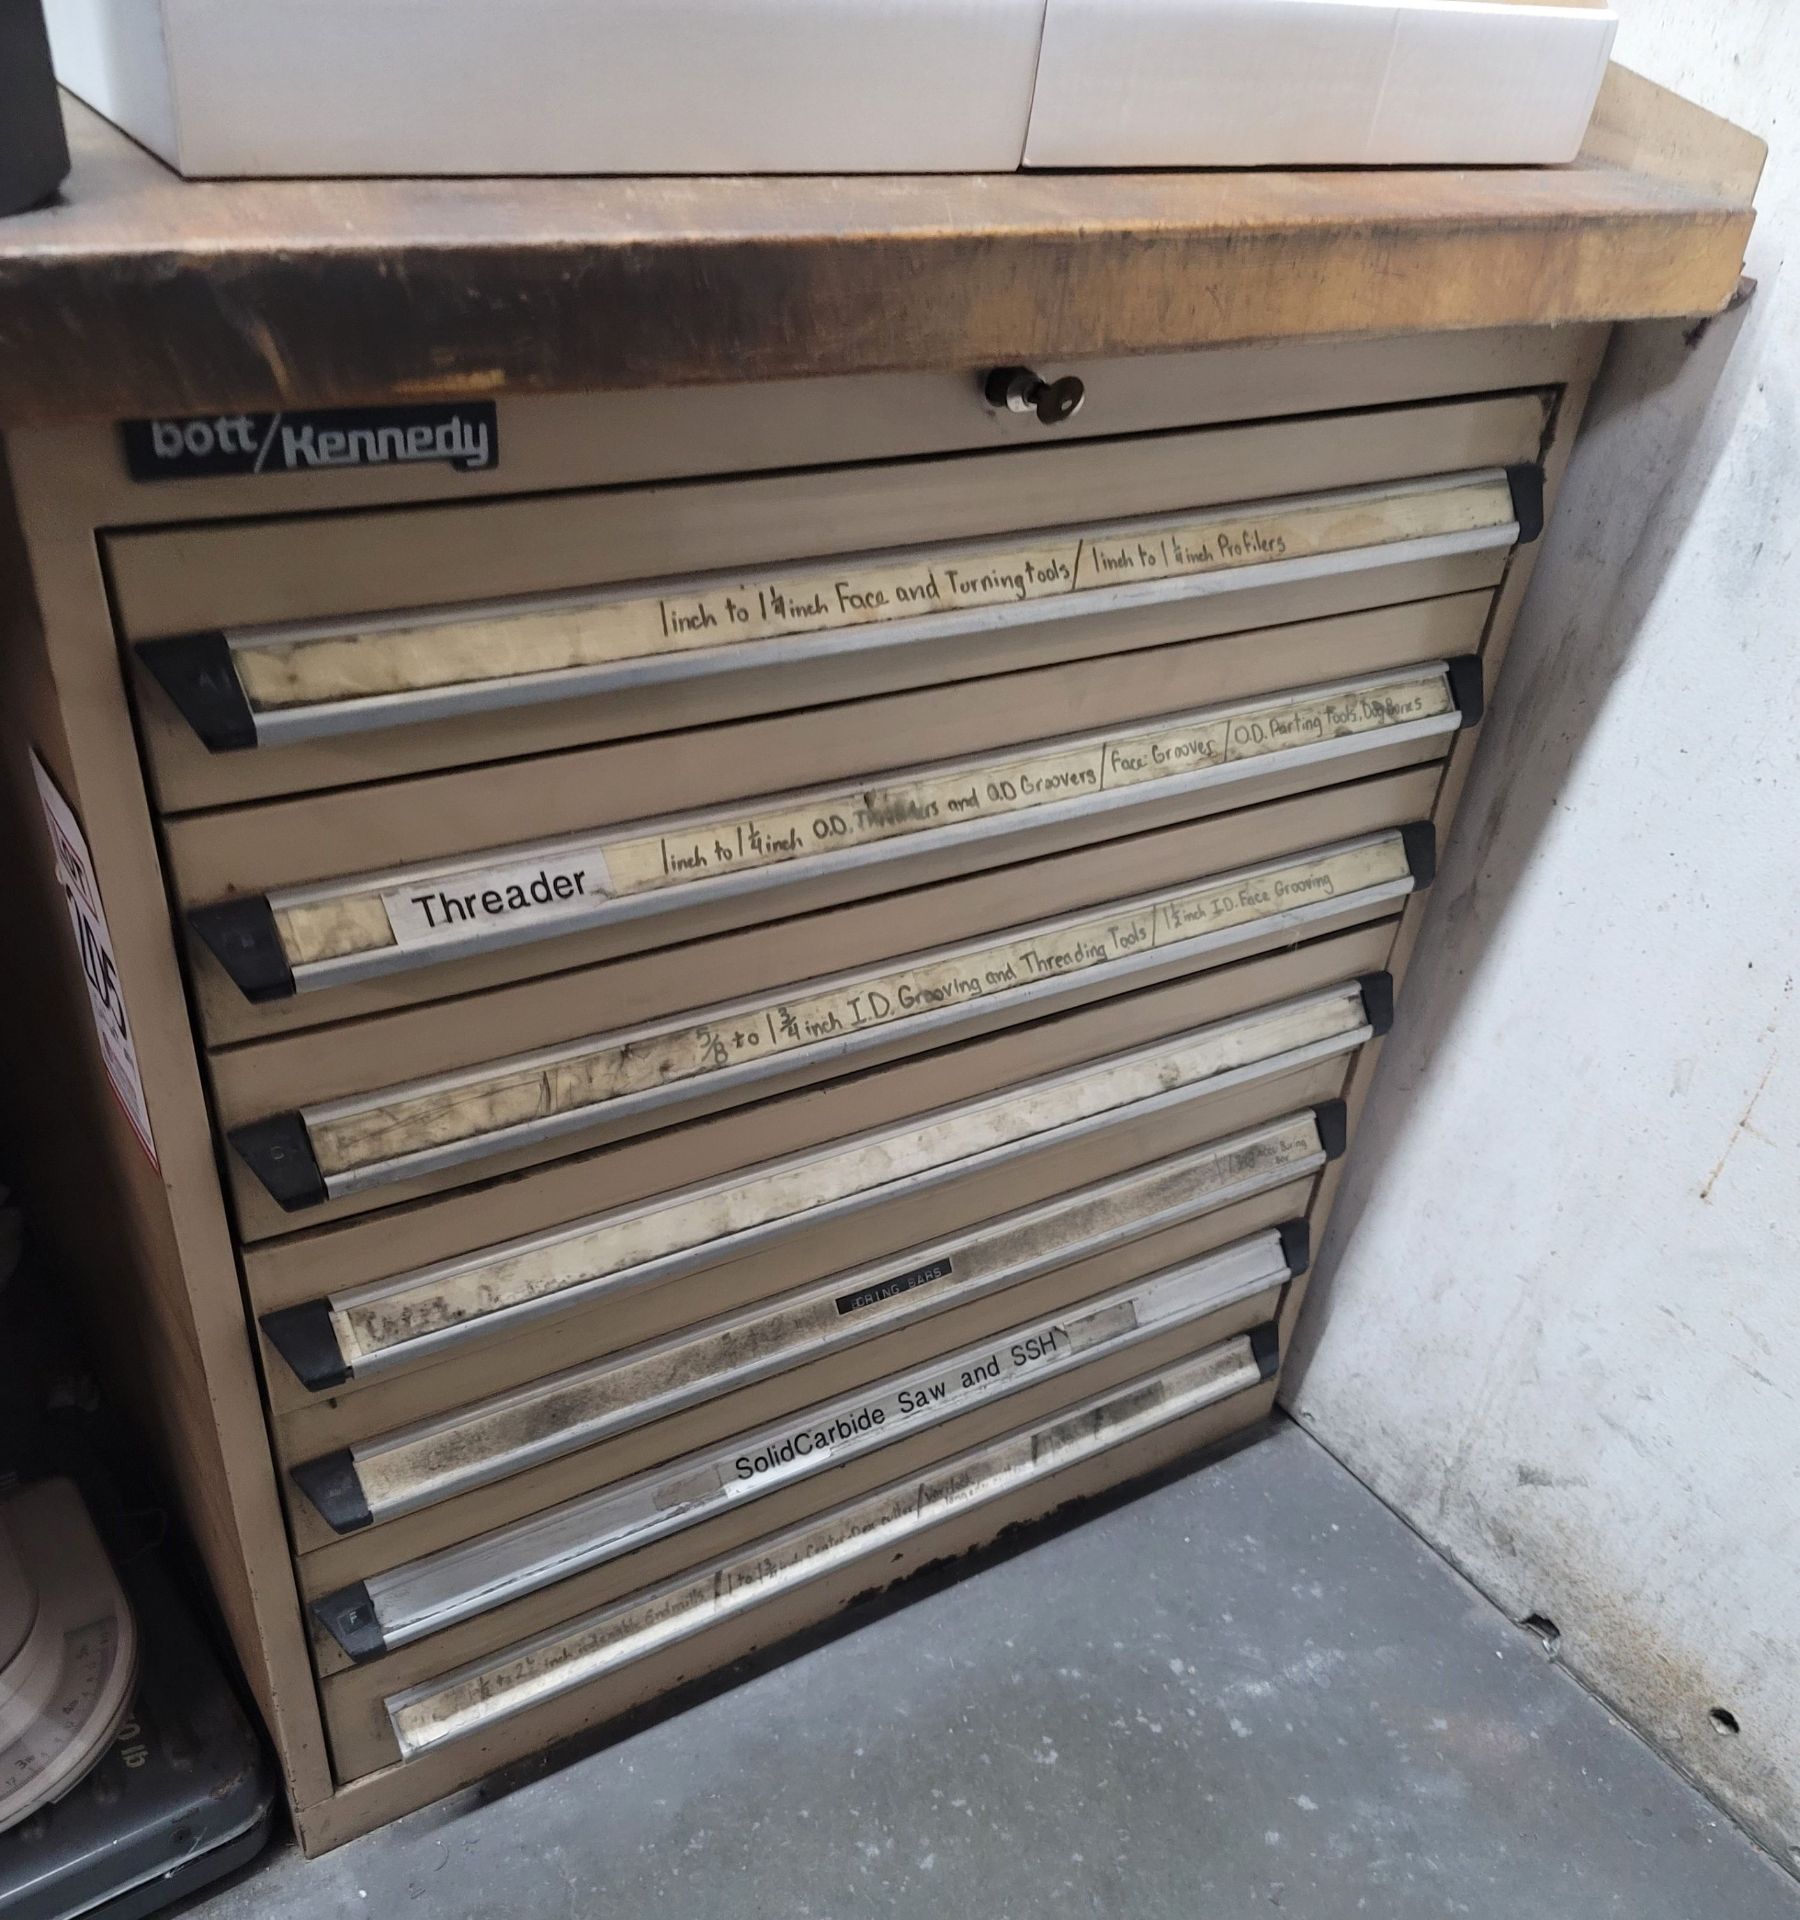 BOTT/KENNEDY 7-DRAWER TOOL CABINET, 29-1/2" X 29-1/2" X 31-1/2" HT, CONTENTS NOT INCLUDED, (